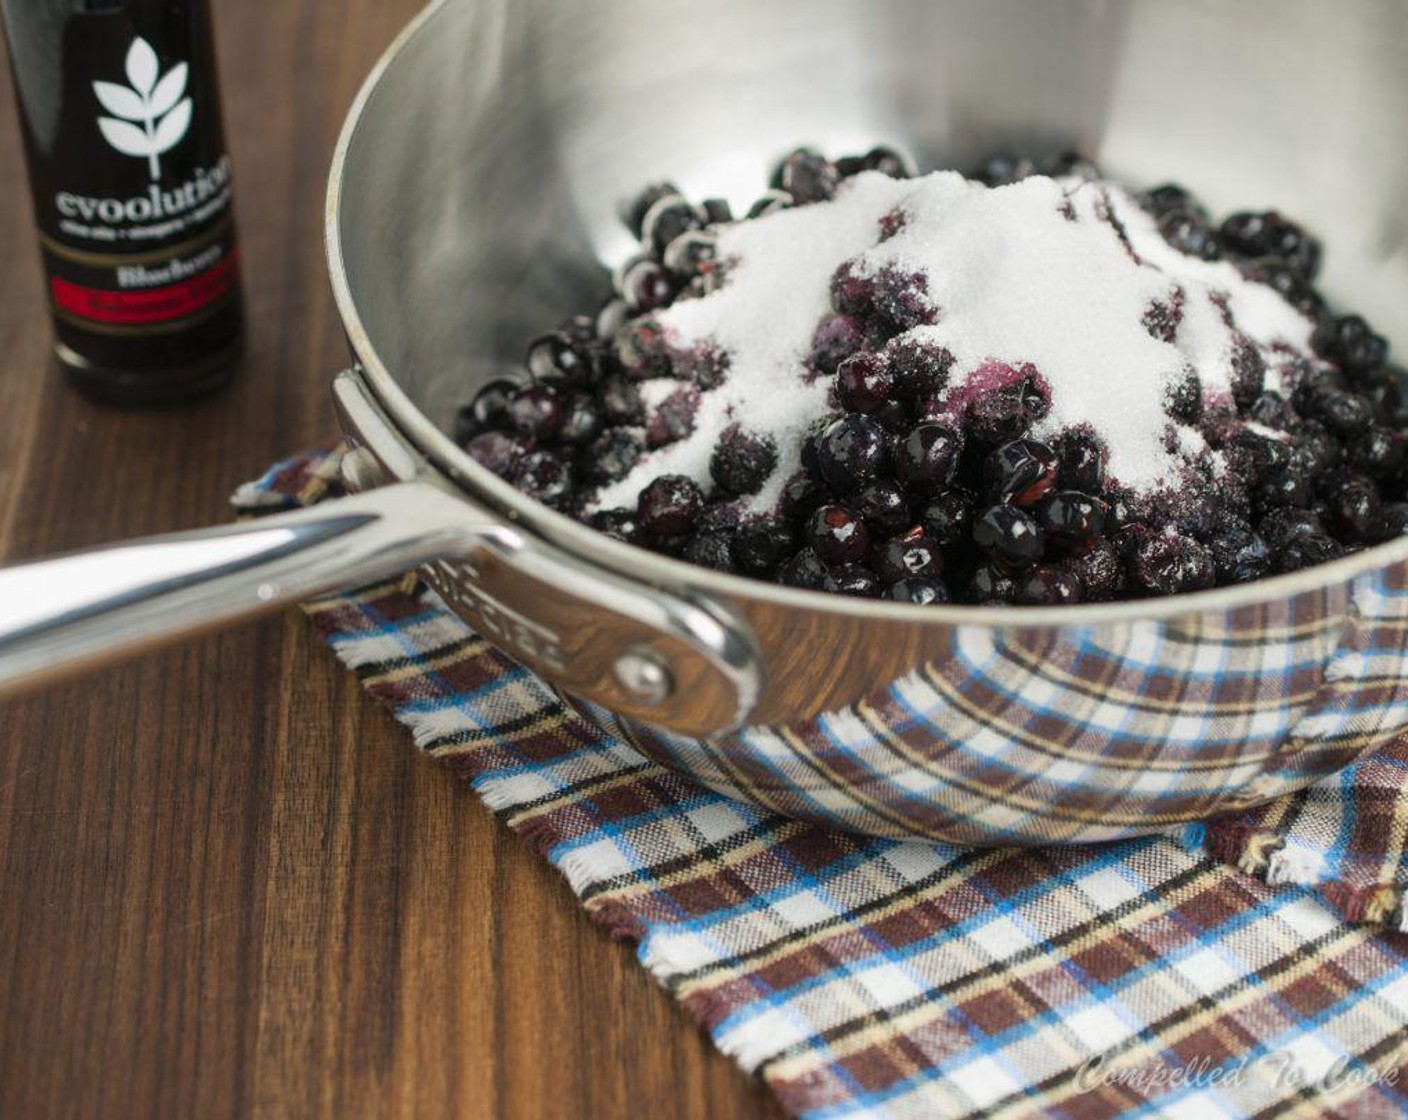 step 1 In a medium sauce pan combine Frozen Blueberries (2 cups), Granulated Sugar (1/2 cup), and Water (1/4 cup).